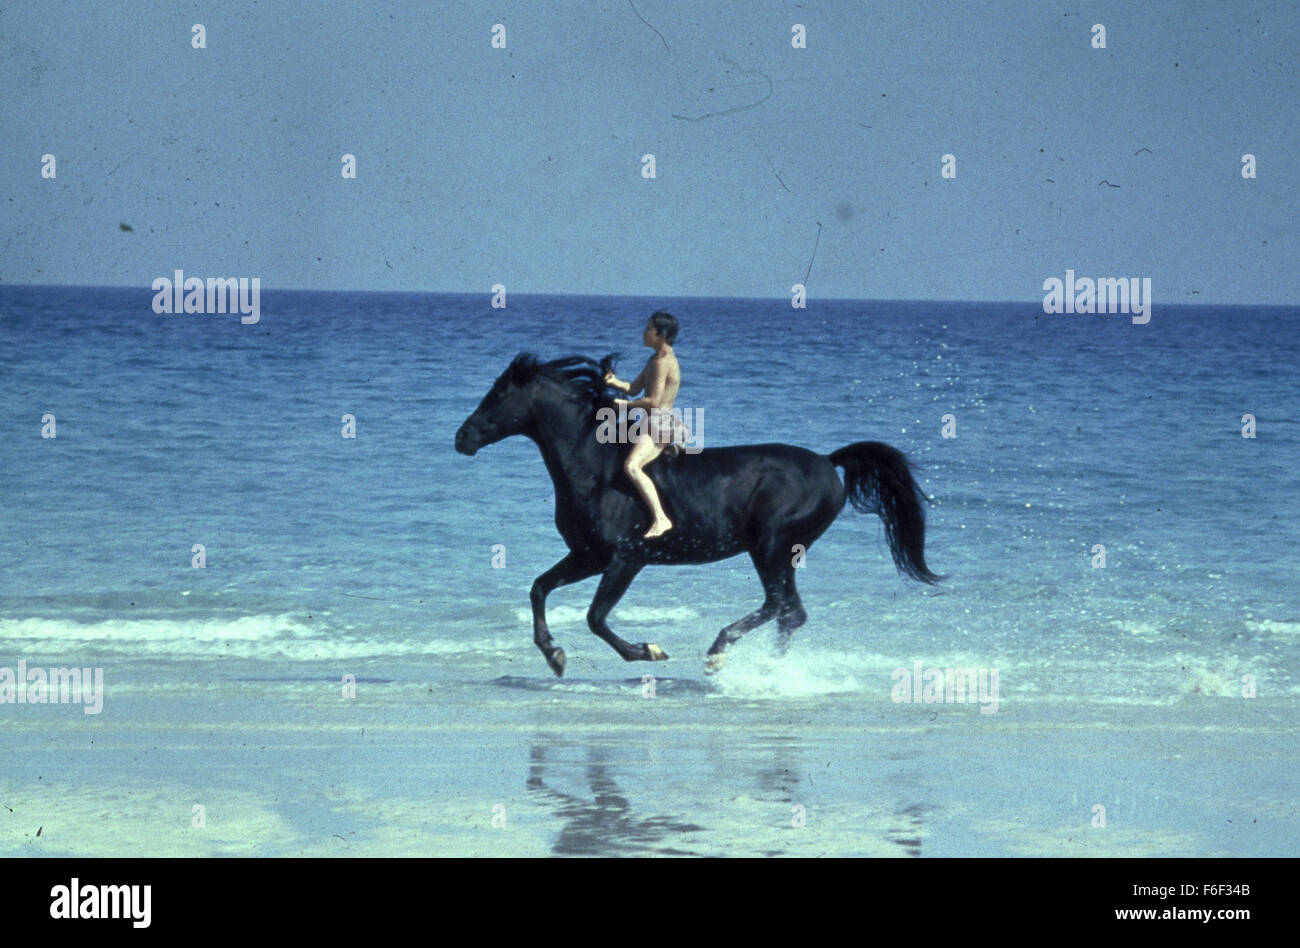 RELEASE DATE: October 17, 1979. MOVIE TITLE: The Black Stallion. STUDIO: Omni Zoetrope. PLOT: While traveling with his father, young Alec becomes fascinated by a mysterious Arabian stallion that is brought on board and stabled in the ship he is sailing on. When the ship tragically sinks both he and the horse survive only to be stranded on a deserted island. Alec befriends the horse, so when finally rescued both return to his home where they soon meet Henry Dailey, a once successful trainer. Together they begin training The Black to race against the fastest horses in the world. PICTURED: KELLY Stock Photo